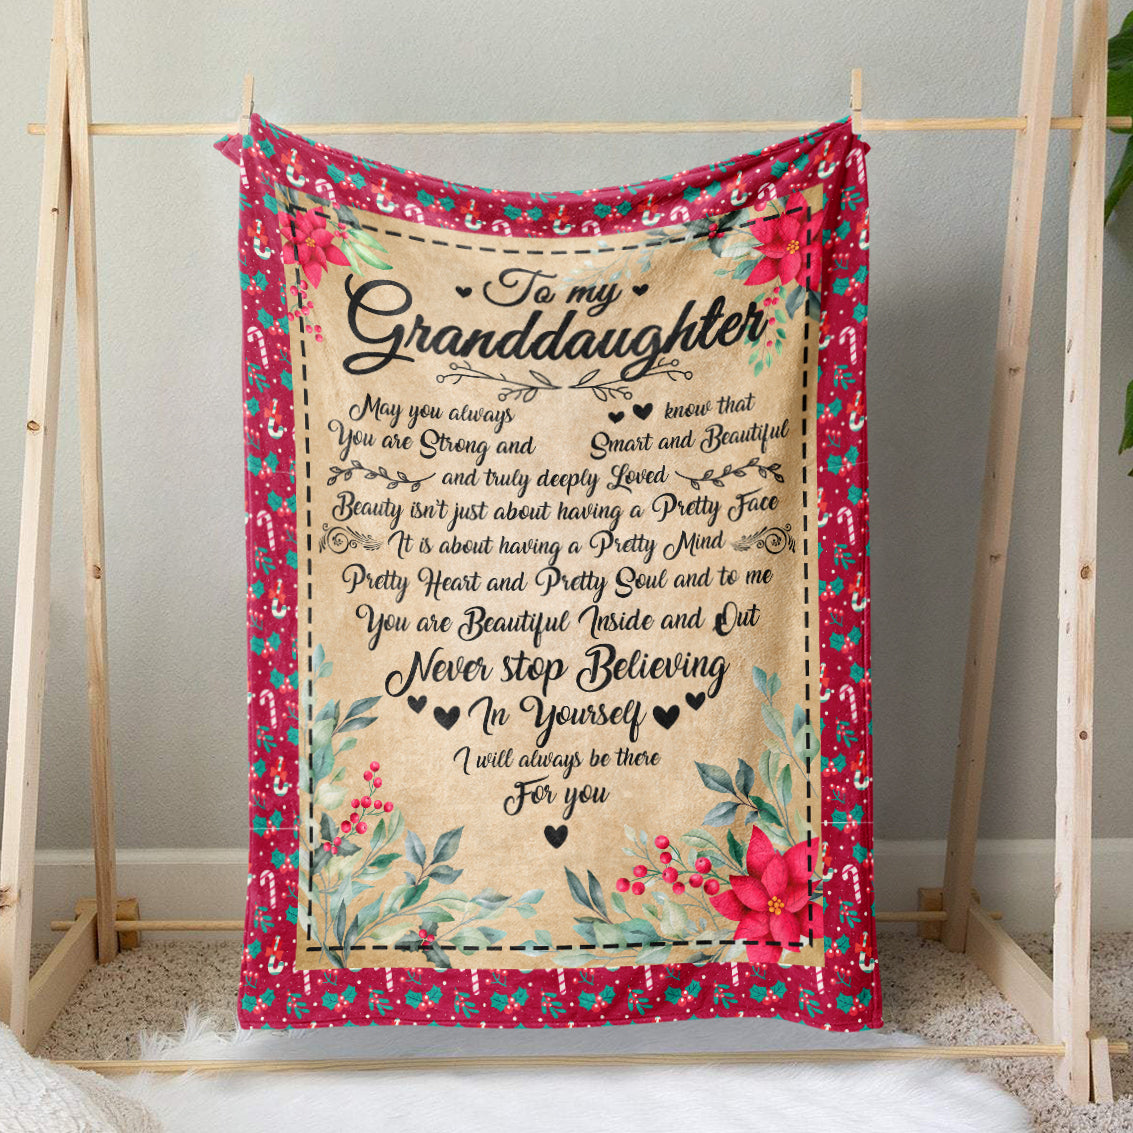 Christmas Gift Ideas for Granddaughter, You Are Beautiful Inside and Out, Believe in Yourself Blanket, Christmas Secret Santa Gift to Granddaughter